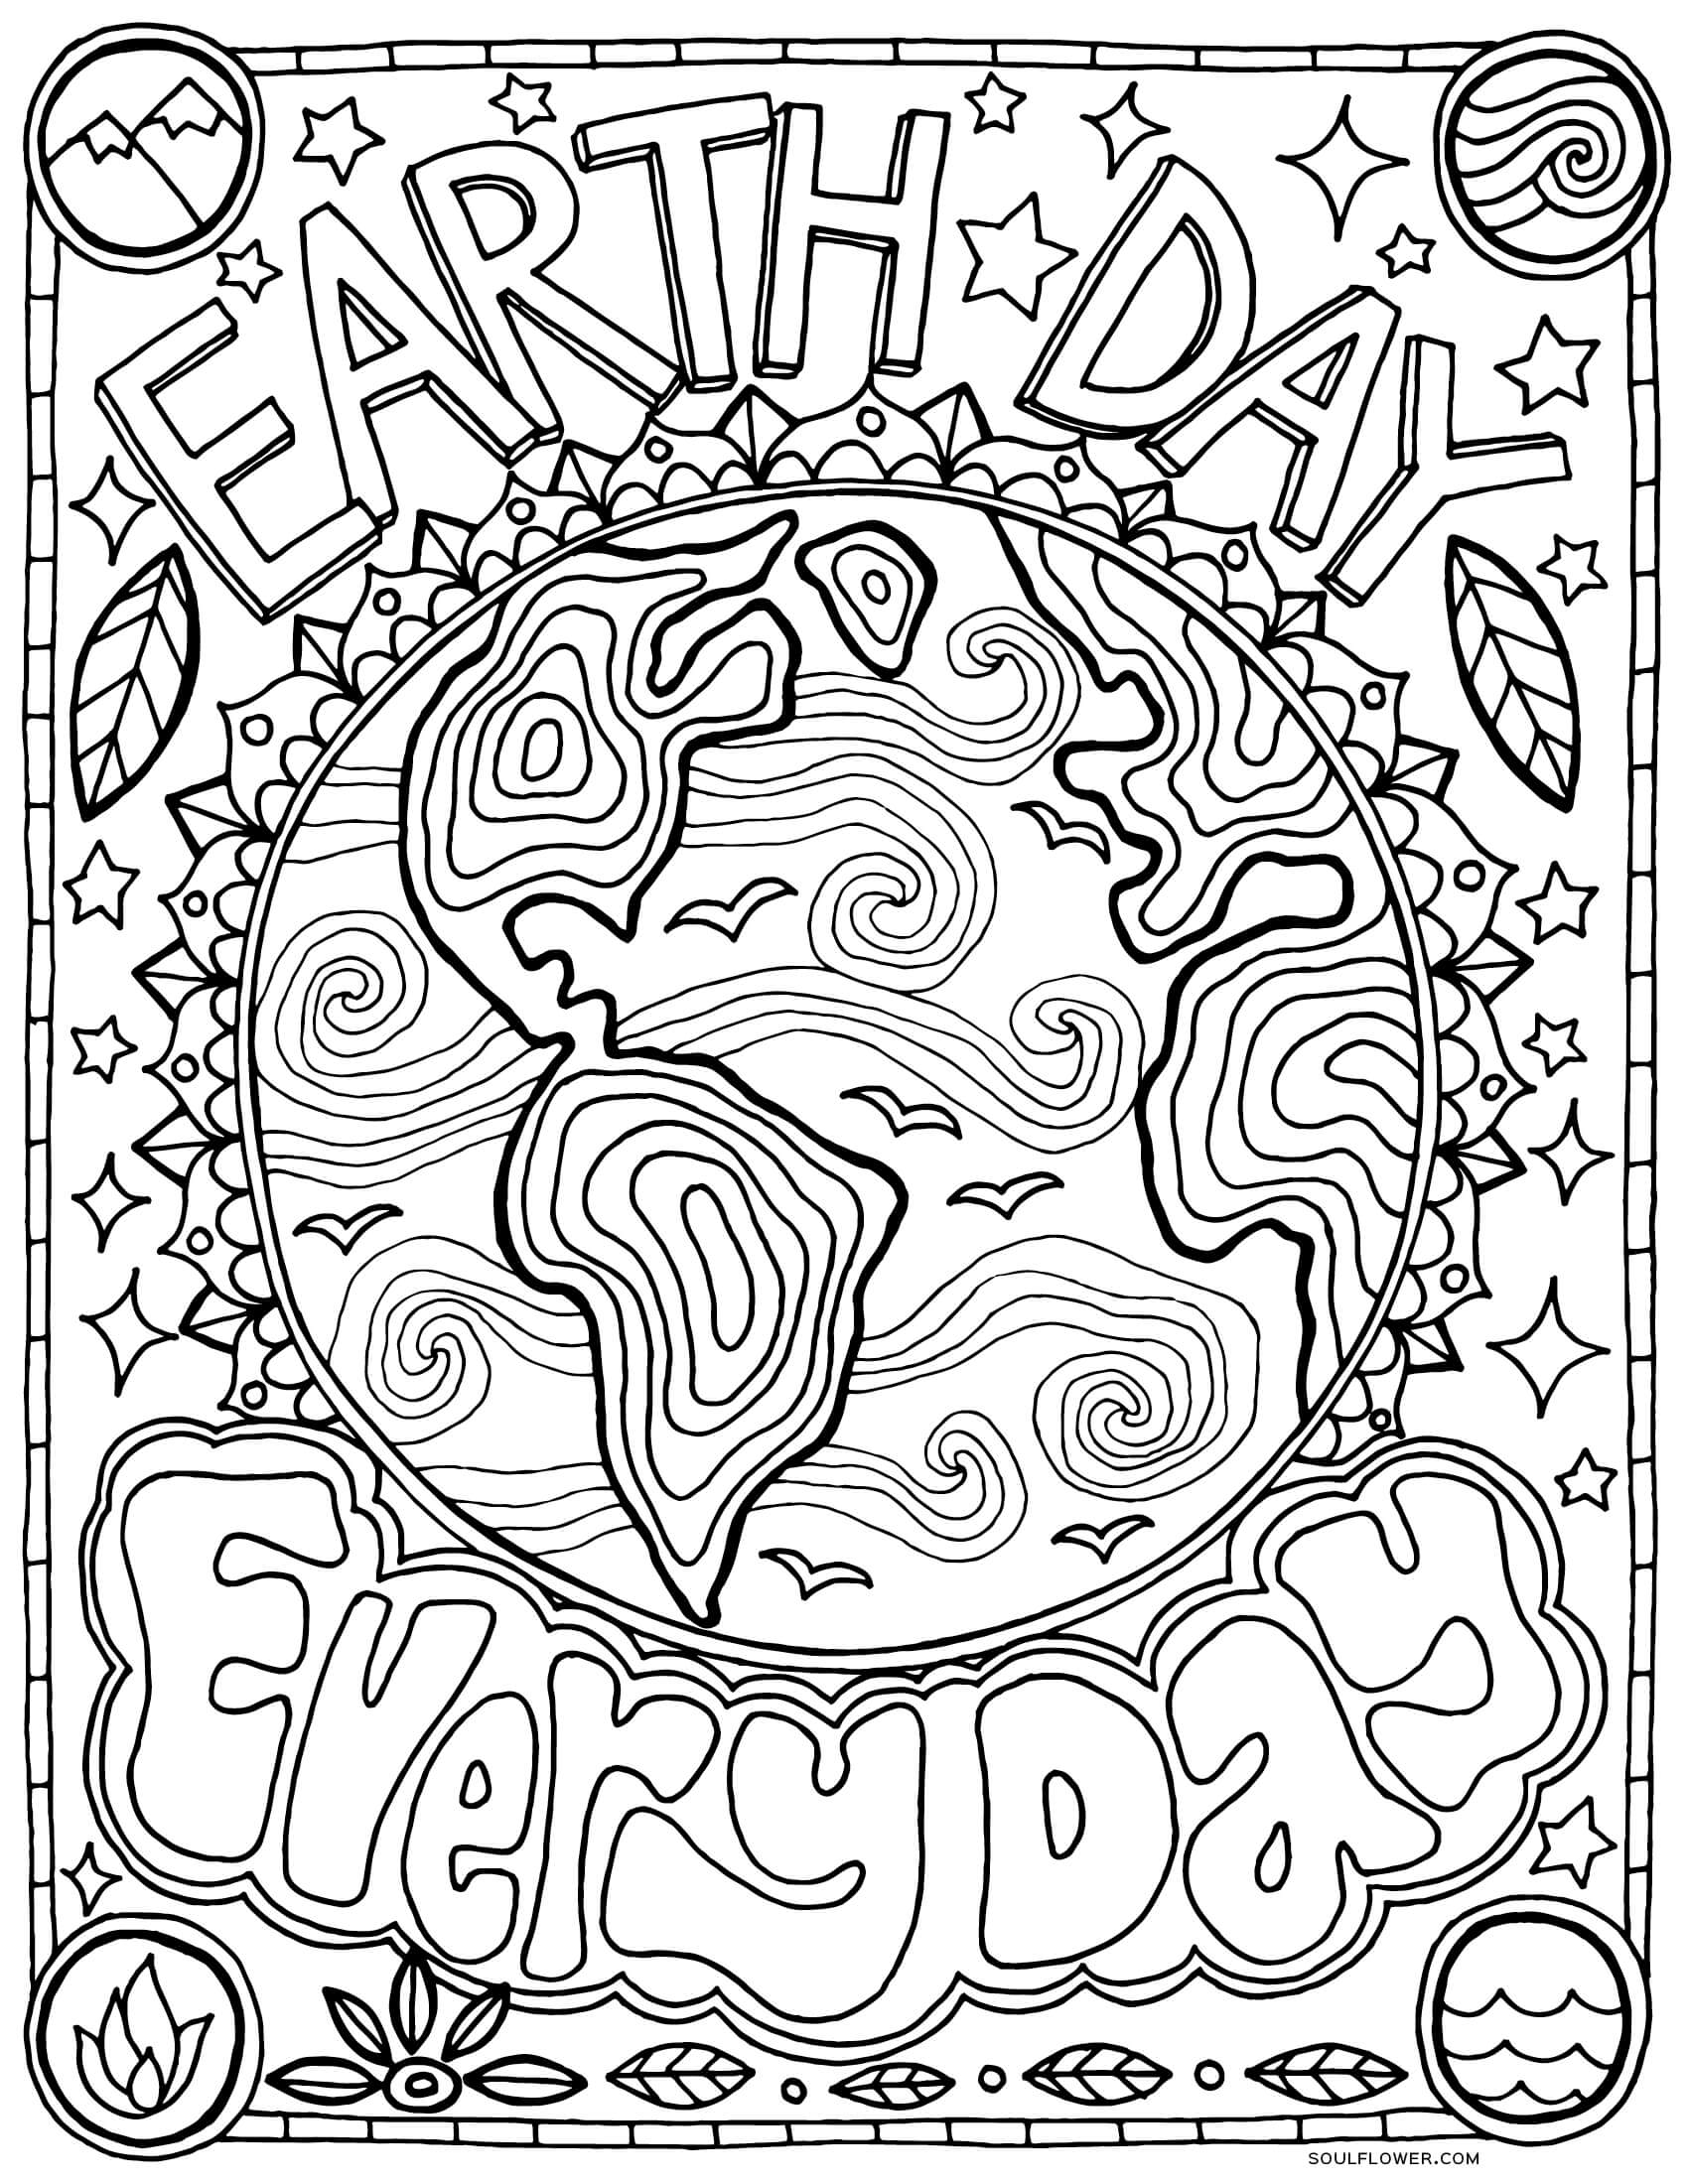 free-earth-day-coloring-page-earth-day-every-day